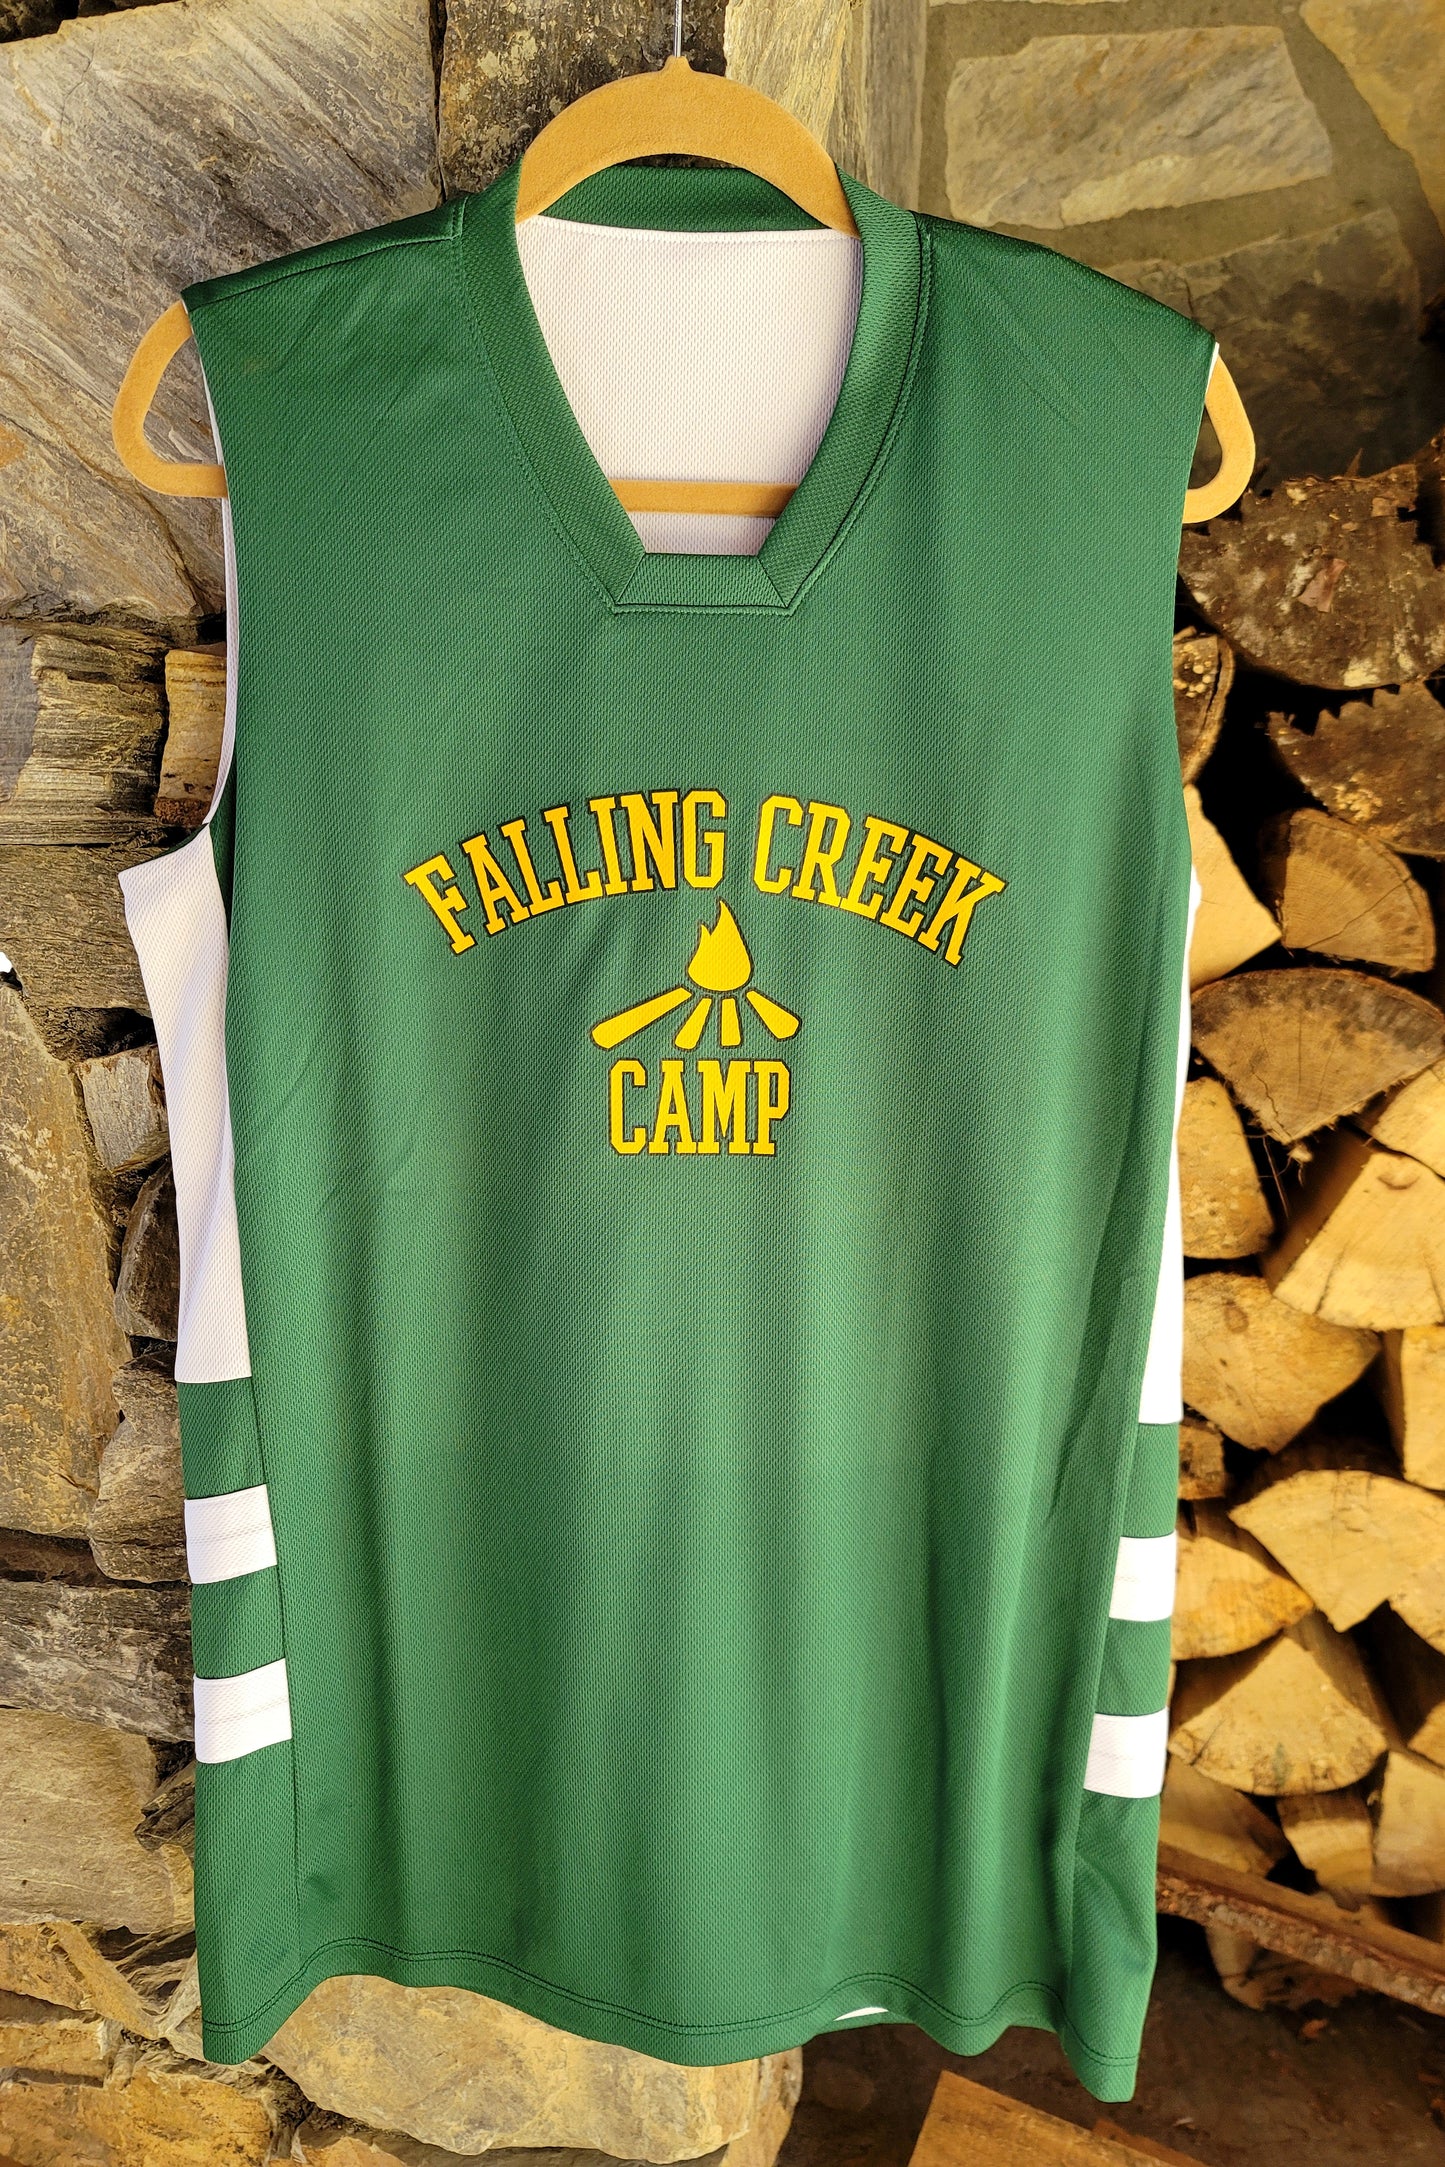 Reversible Jersey - Falling Creek Green and White Double-Sided Basketball Jersey